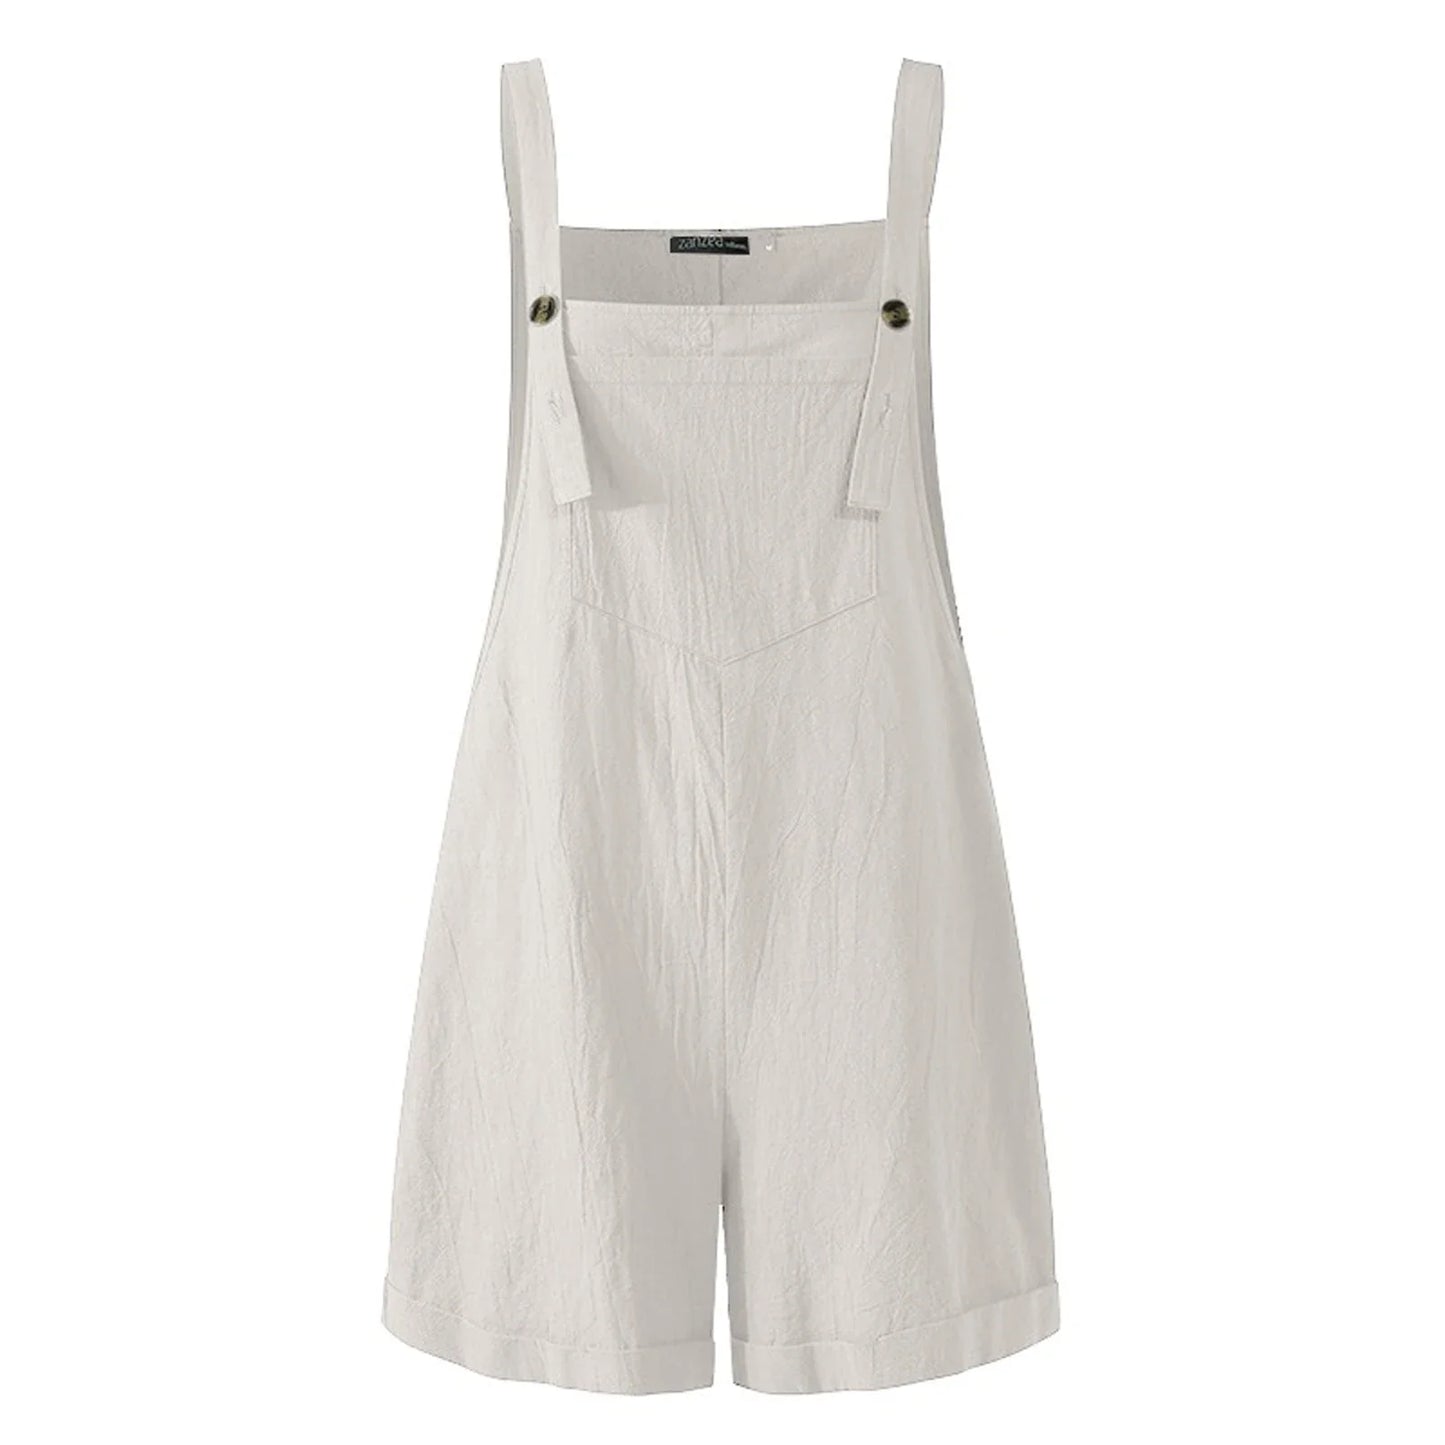 Overalls- Solid Lounge Summer Overalls Playsuit for Women- White- Pekosa Women Fashion